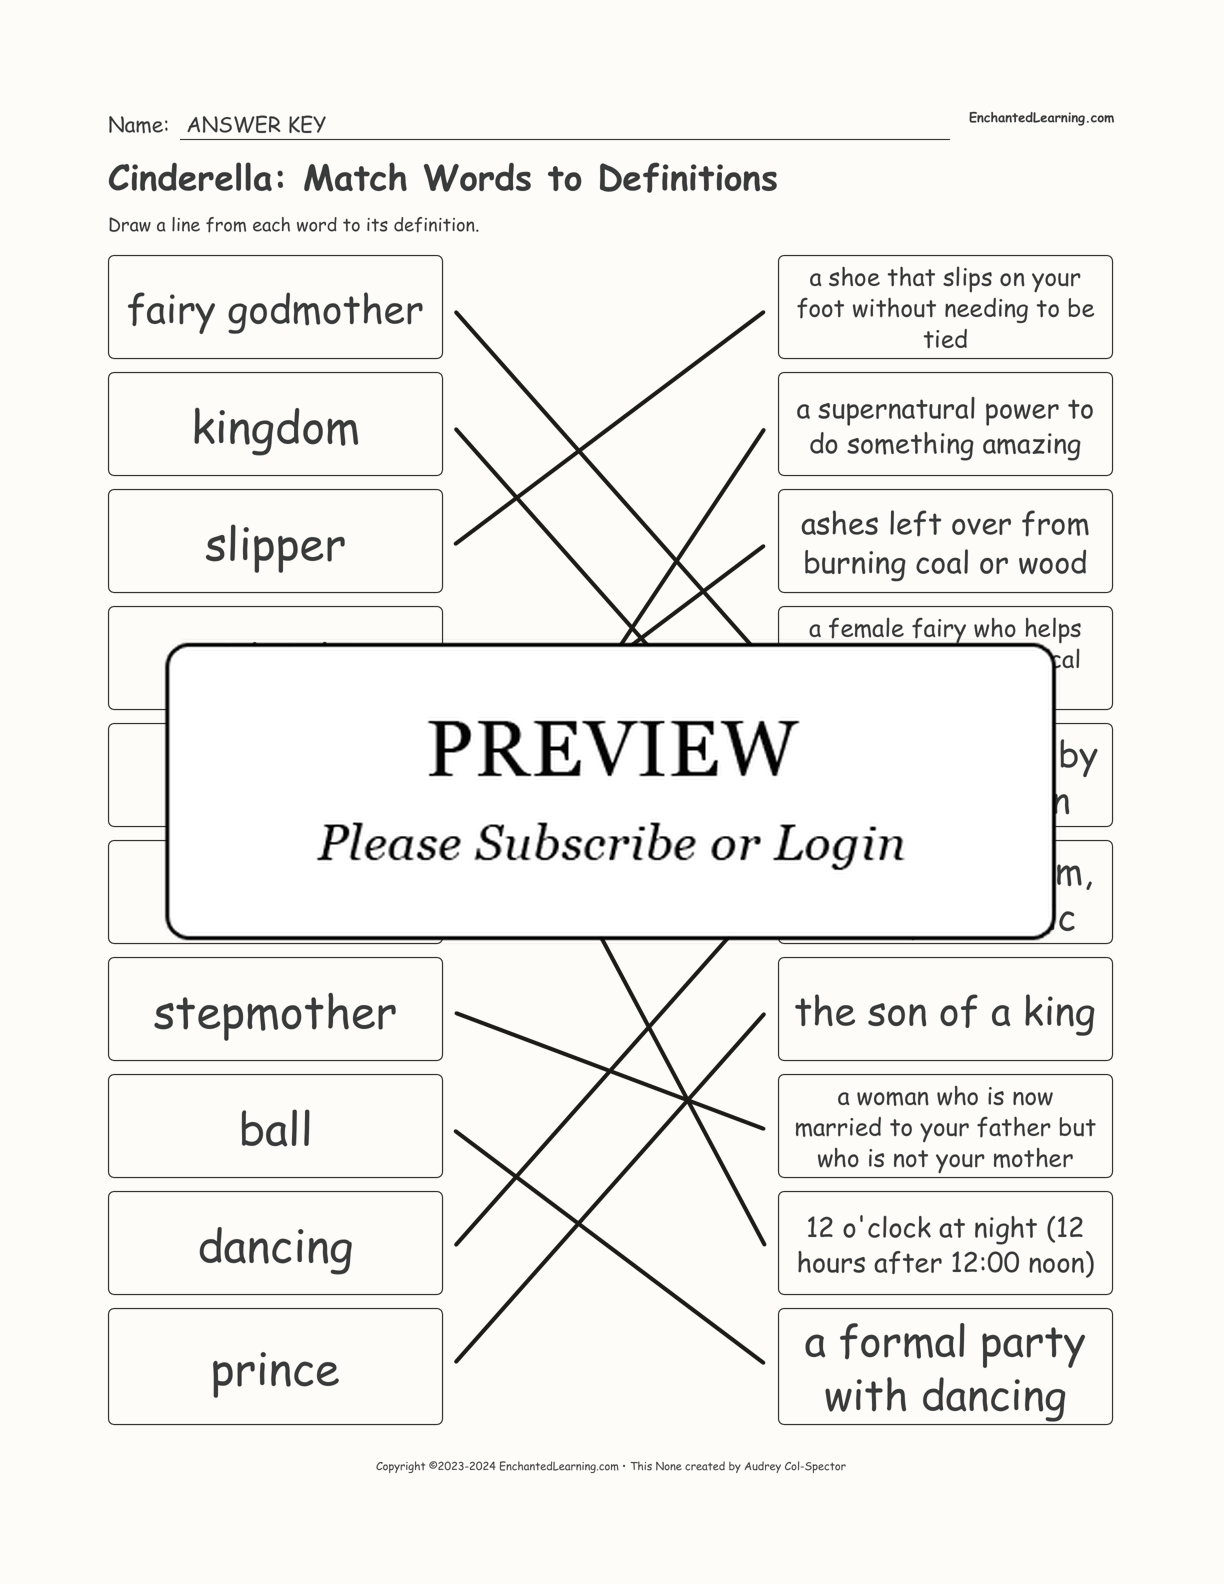 Cinderella: Match Words to Definitions interactive worksheet page 2